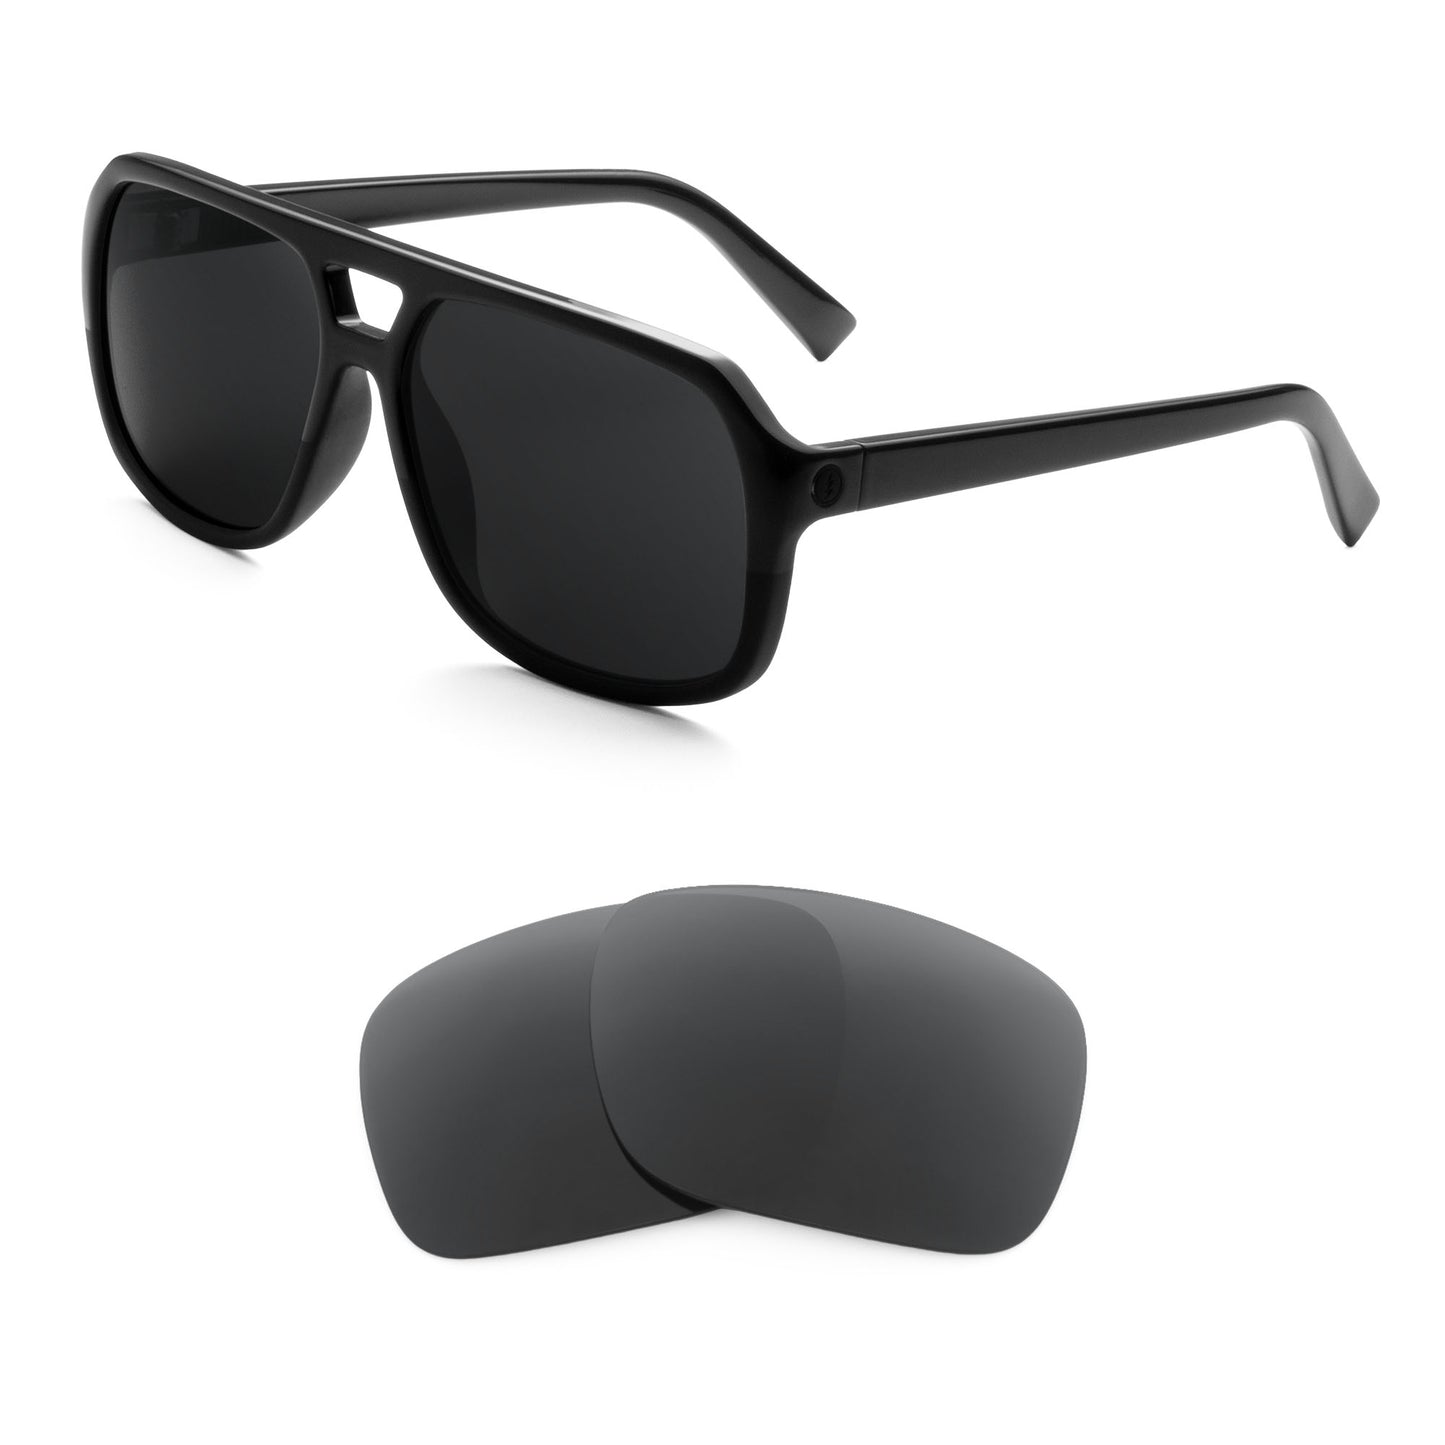 Electric Dude sunglasses with replacement lenses